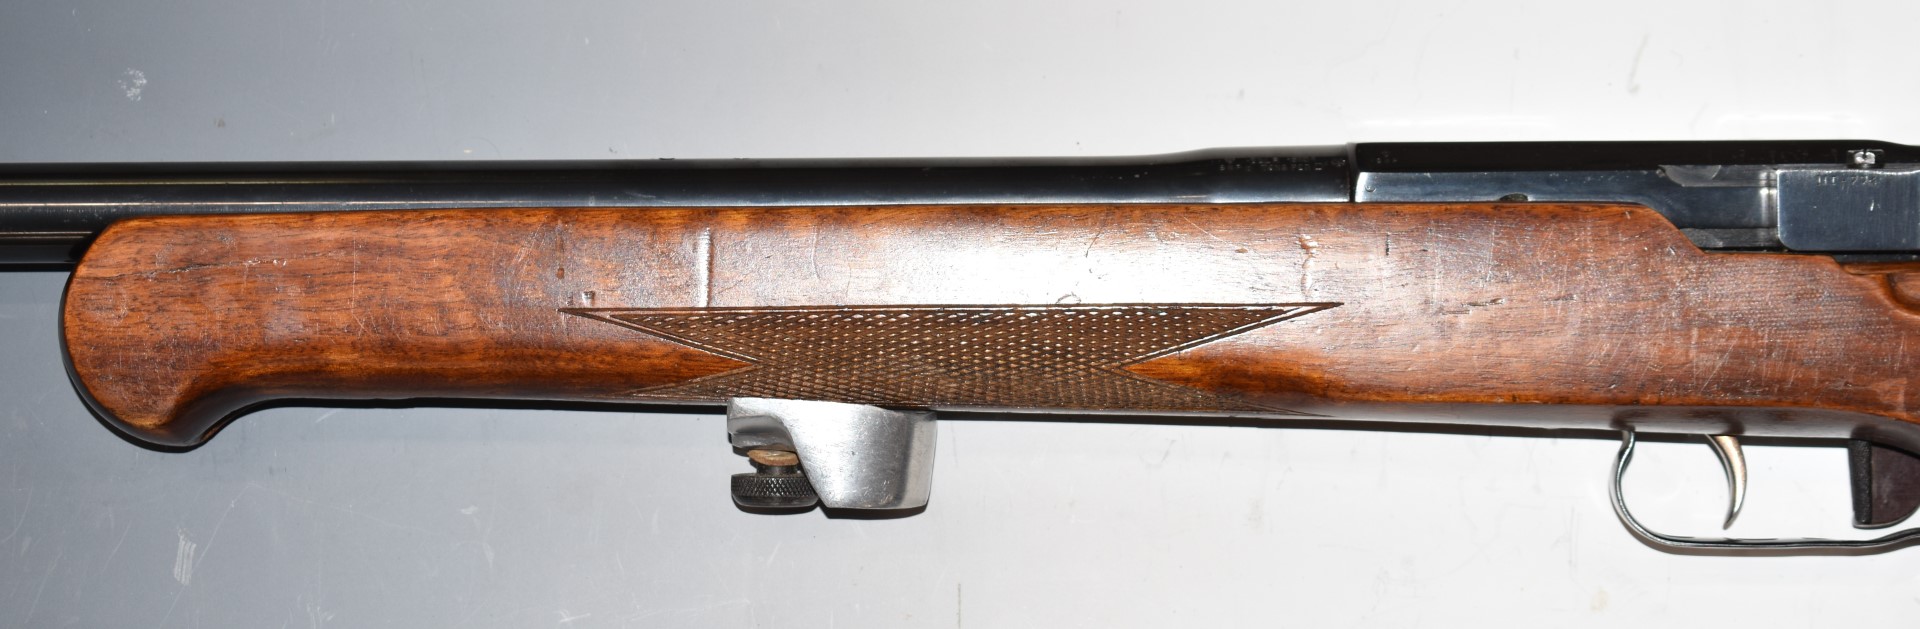 Vostok MU-12 .22 bolt-action target rifle with thumb hole grip, chequered forend, raised cheek - Image 9 of 15